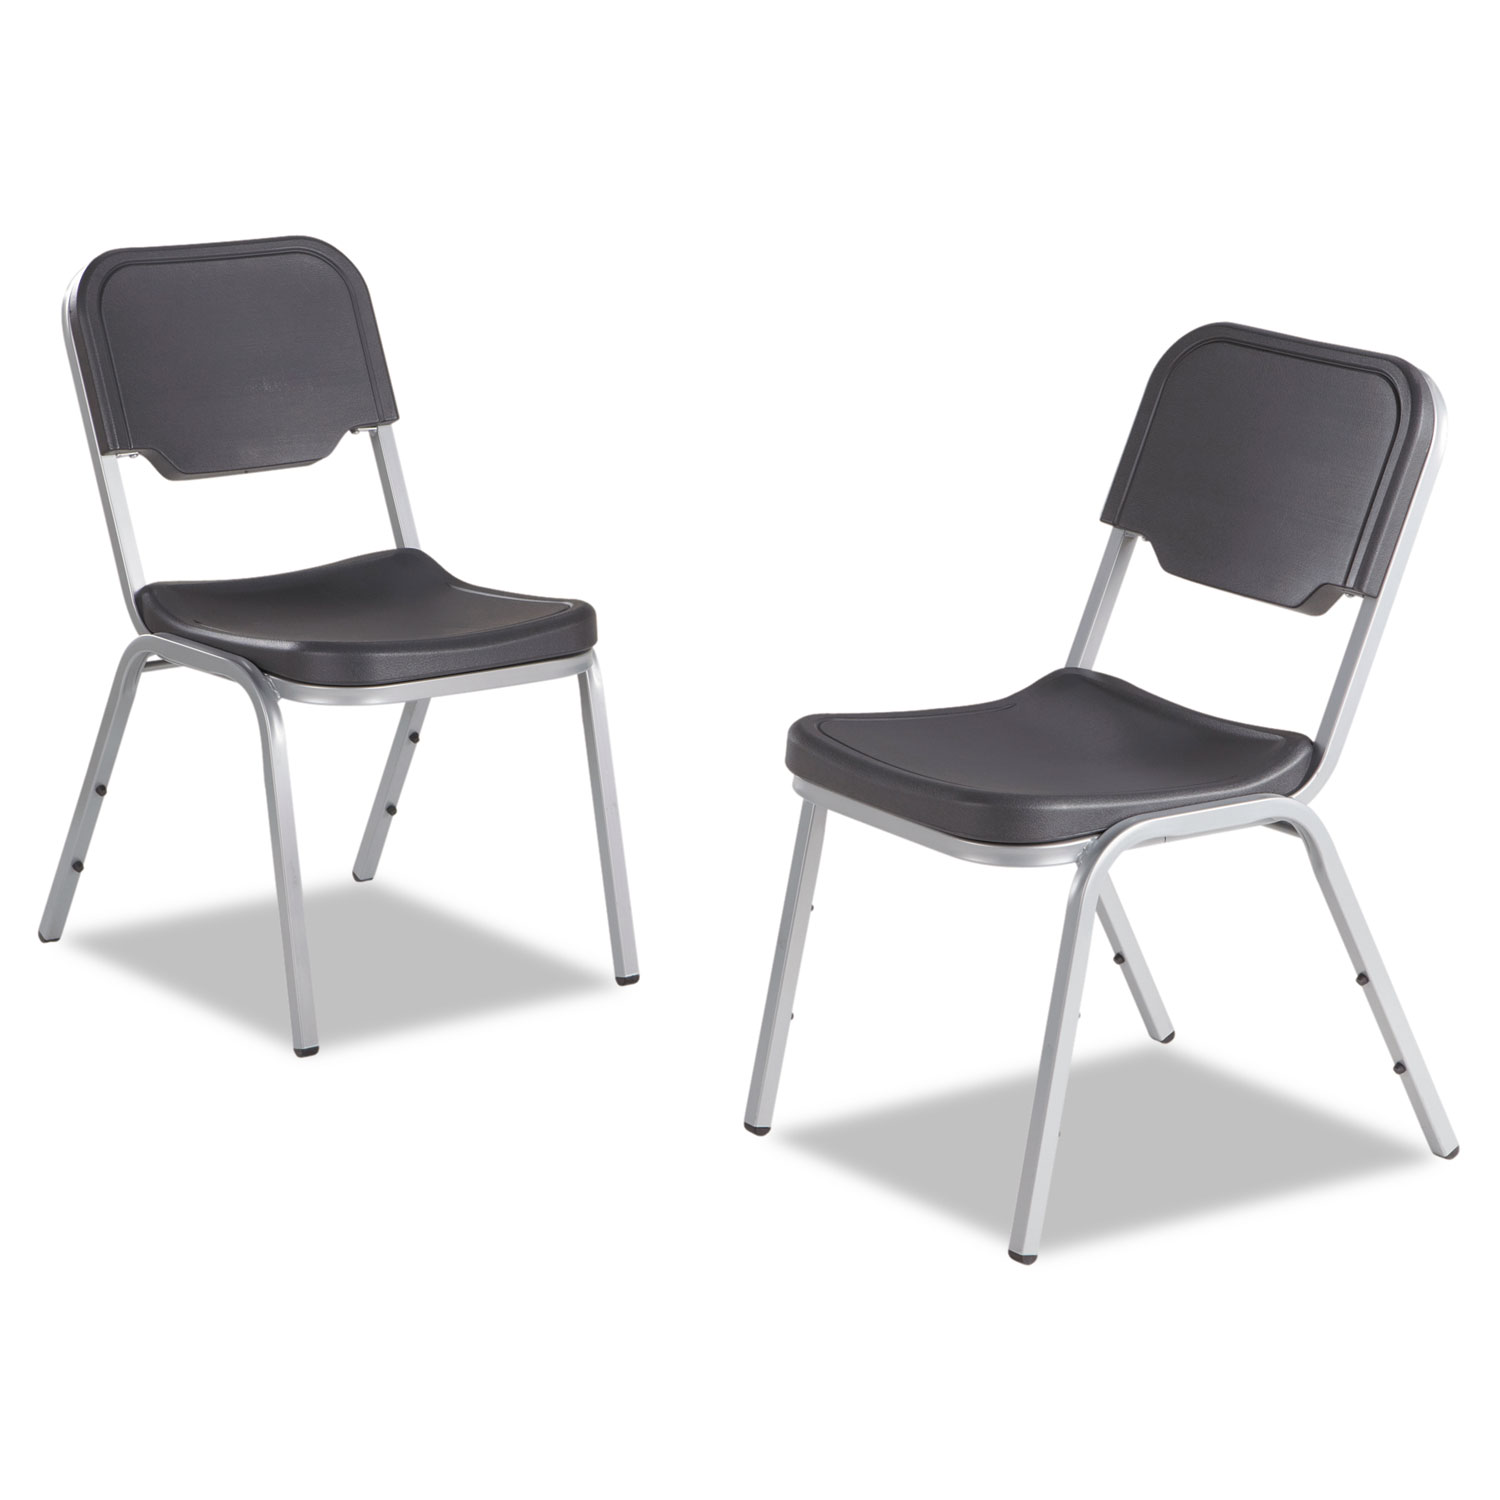  Iceberg 64117 Rough 'N Ready Original Stack Chair, Charcoal Seat/Charcoal Back, Silver Base, 4/Carton (ICE64117) 